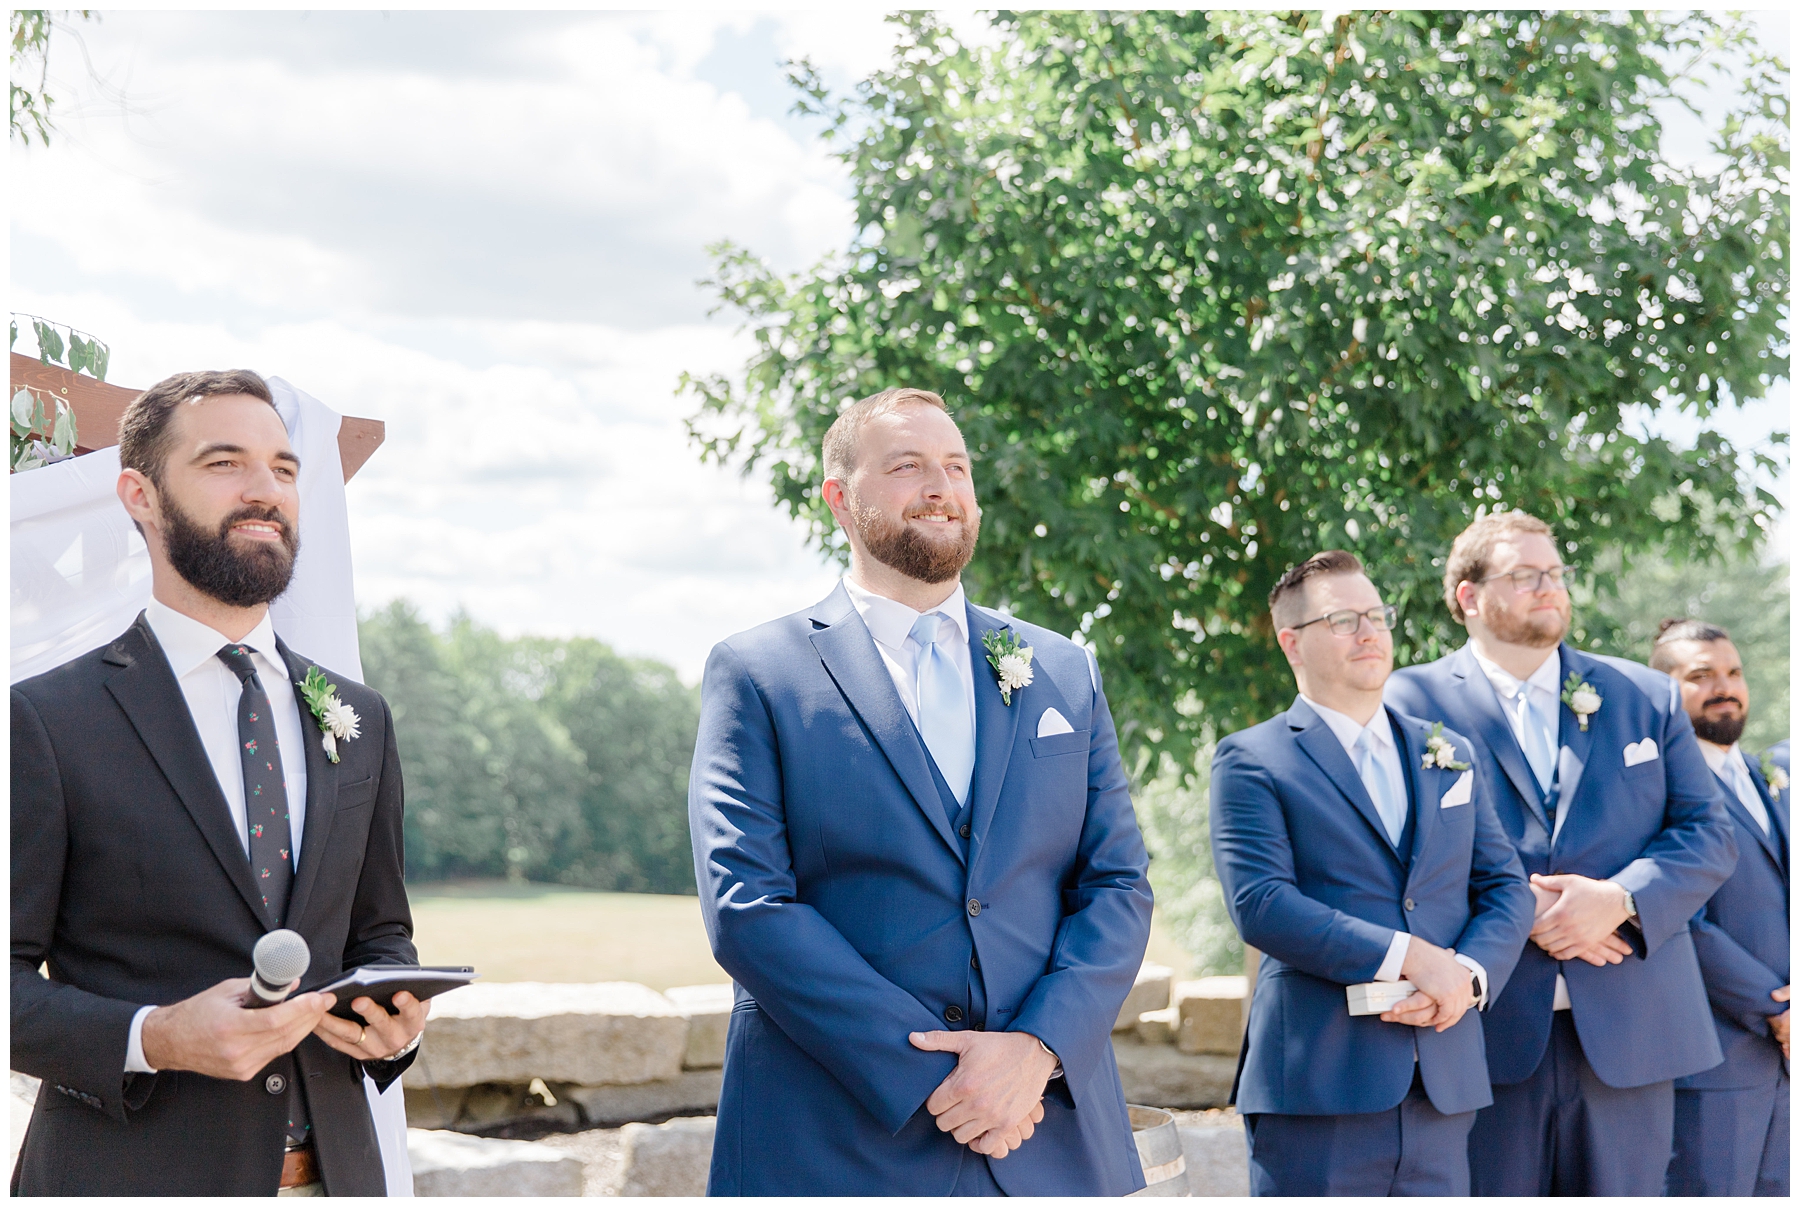 groom sees his bride for the first time during ceremony